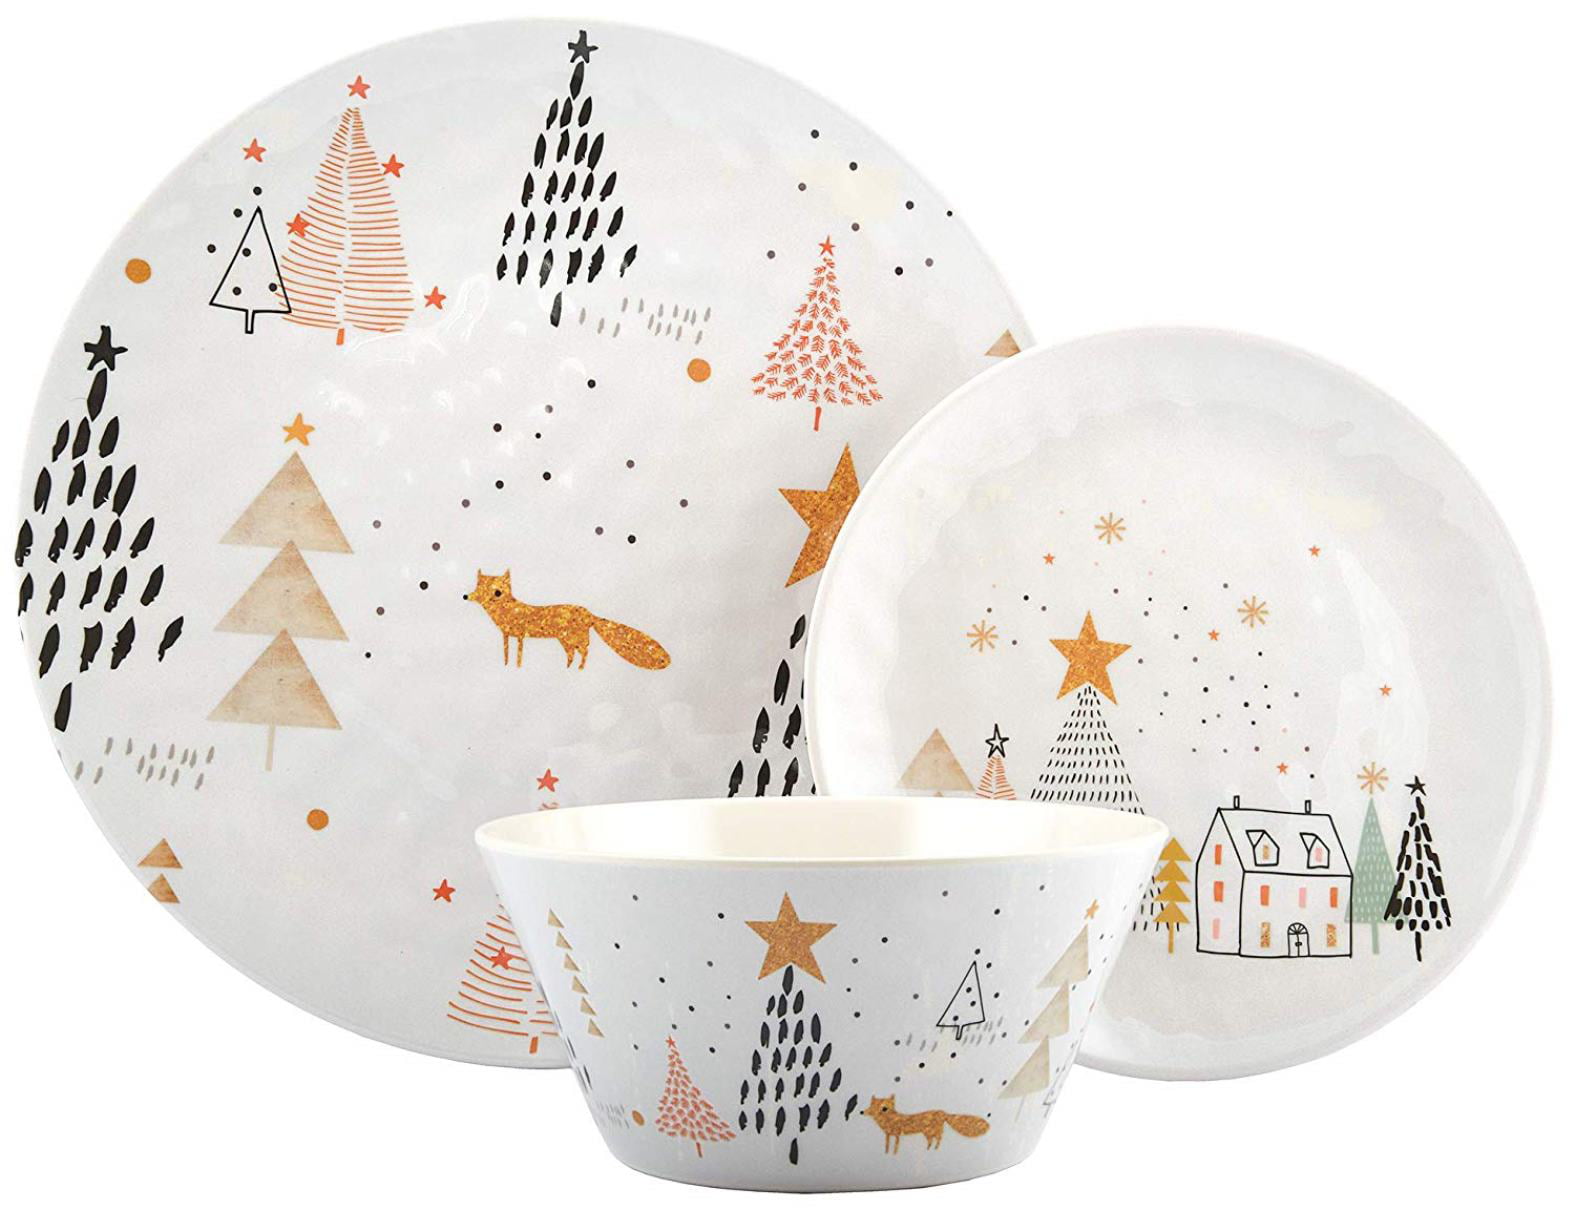 Salad Plate & Soup Bowl White Melange 608410091580 12-Piece 100% Dinnerware Set for 4 Christmas Collection-Golden Fox Shatter-Proof and Chip-Resistant Melamine Dinner Plate 10.5 4 Each 